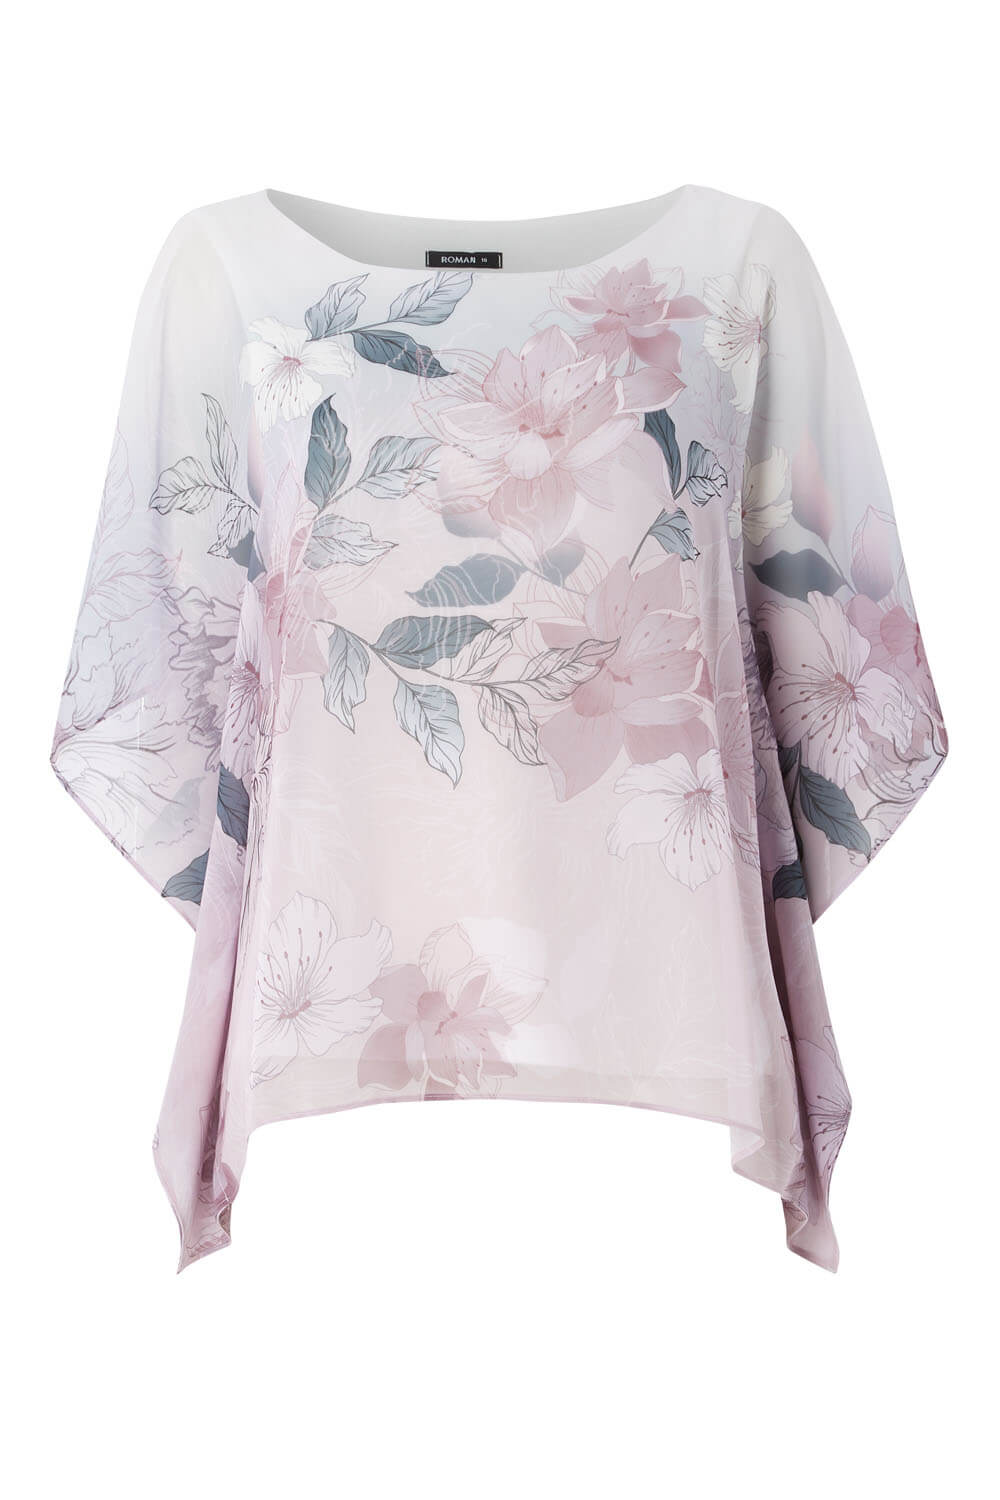 PINK Floral Chiffon Overlay Top, Image 4 of 8